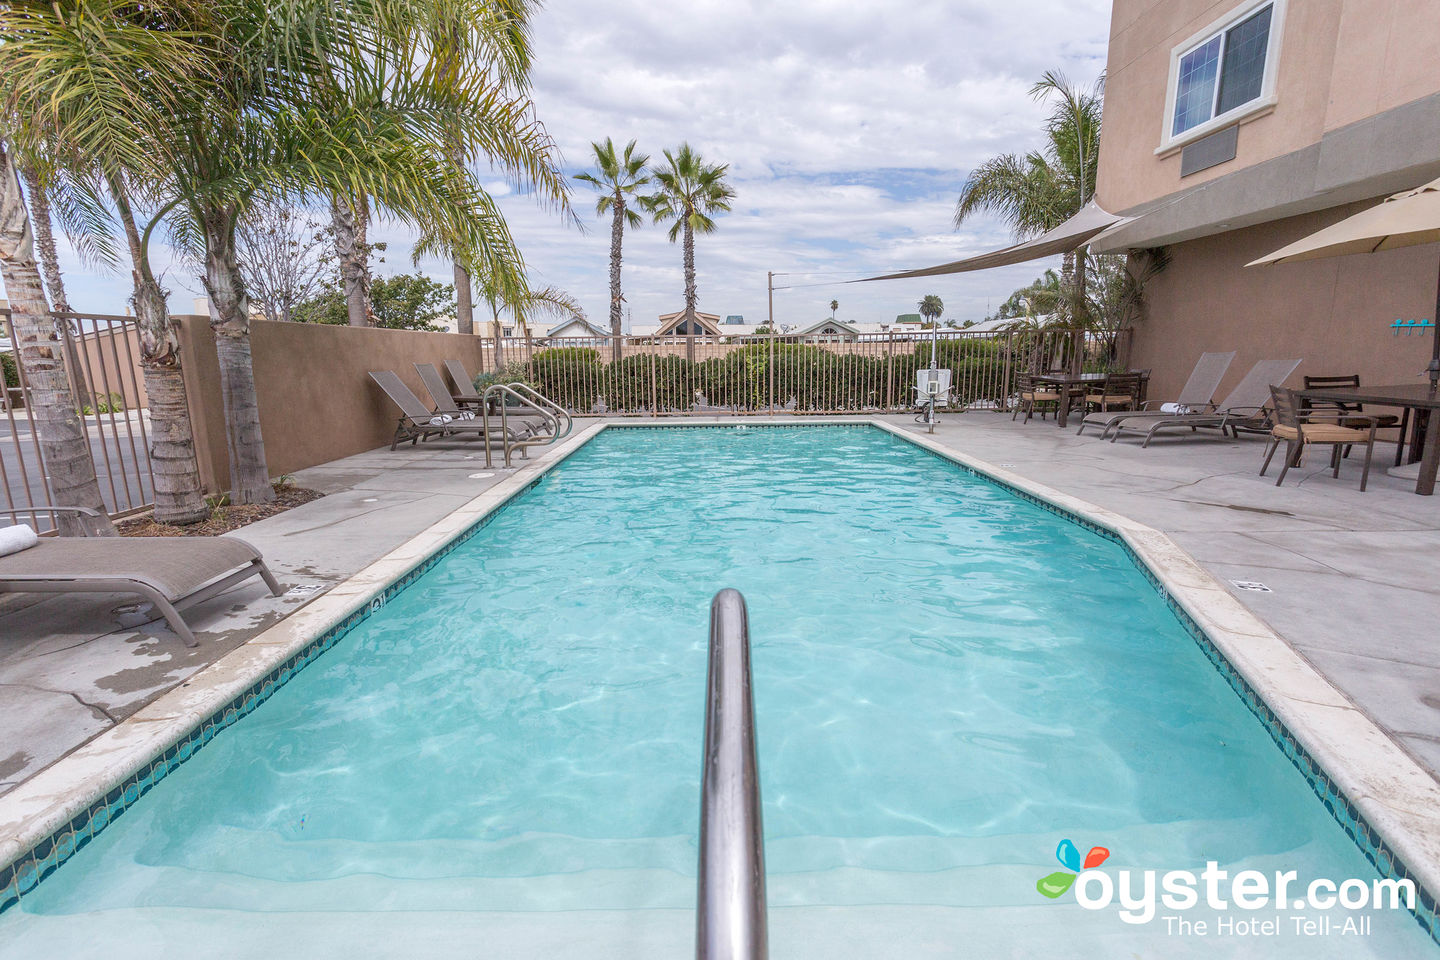 Best Western Plus Oceanside Palms Review: What To REALLY Expect If You Stay